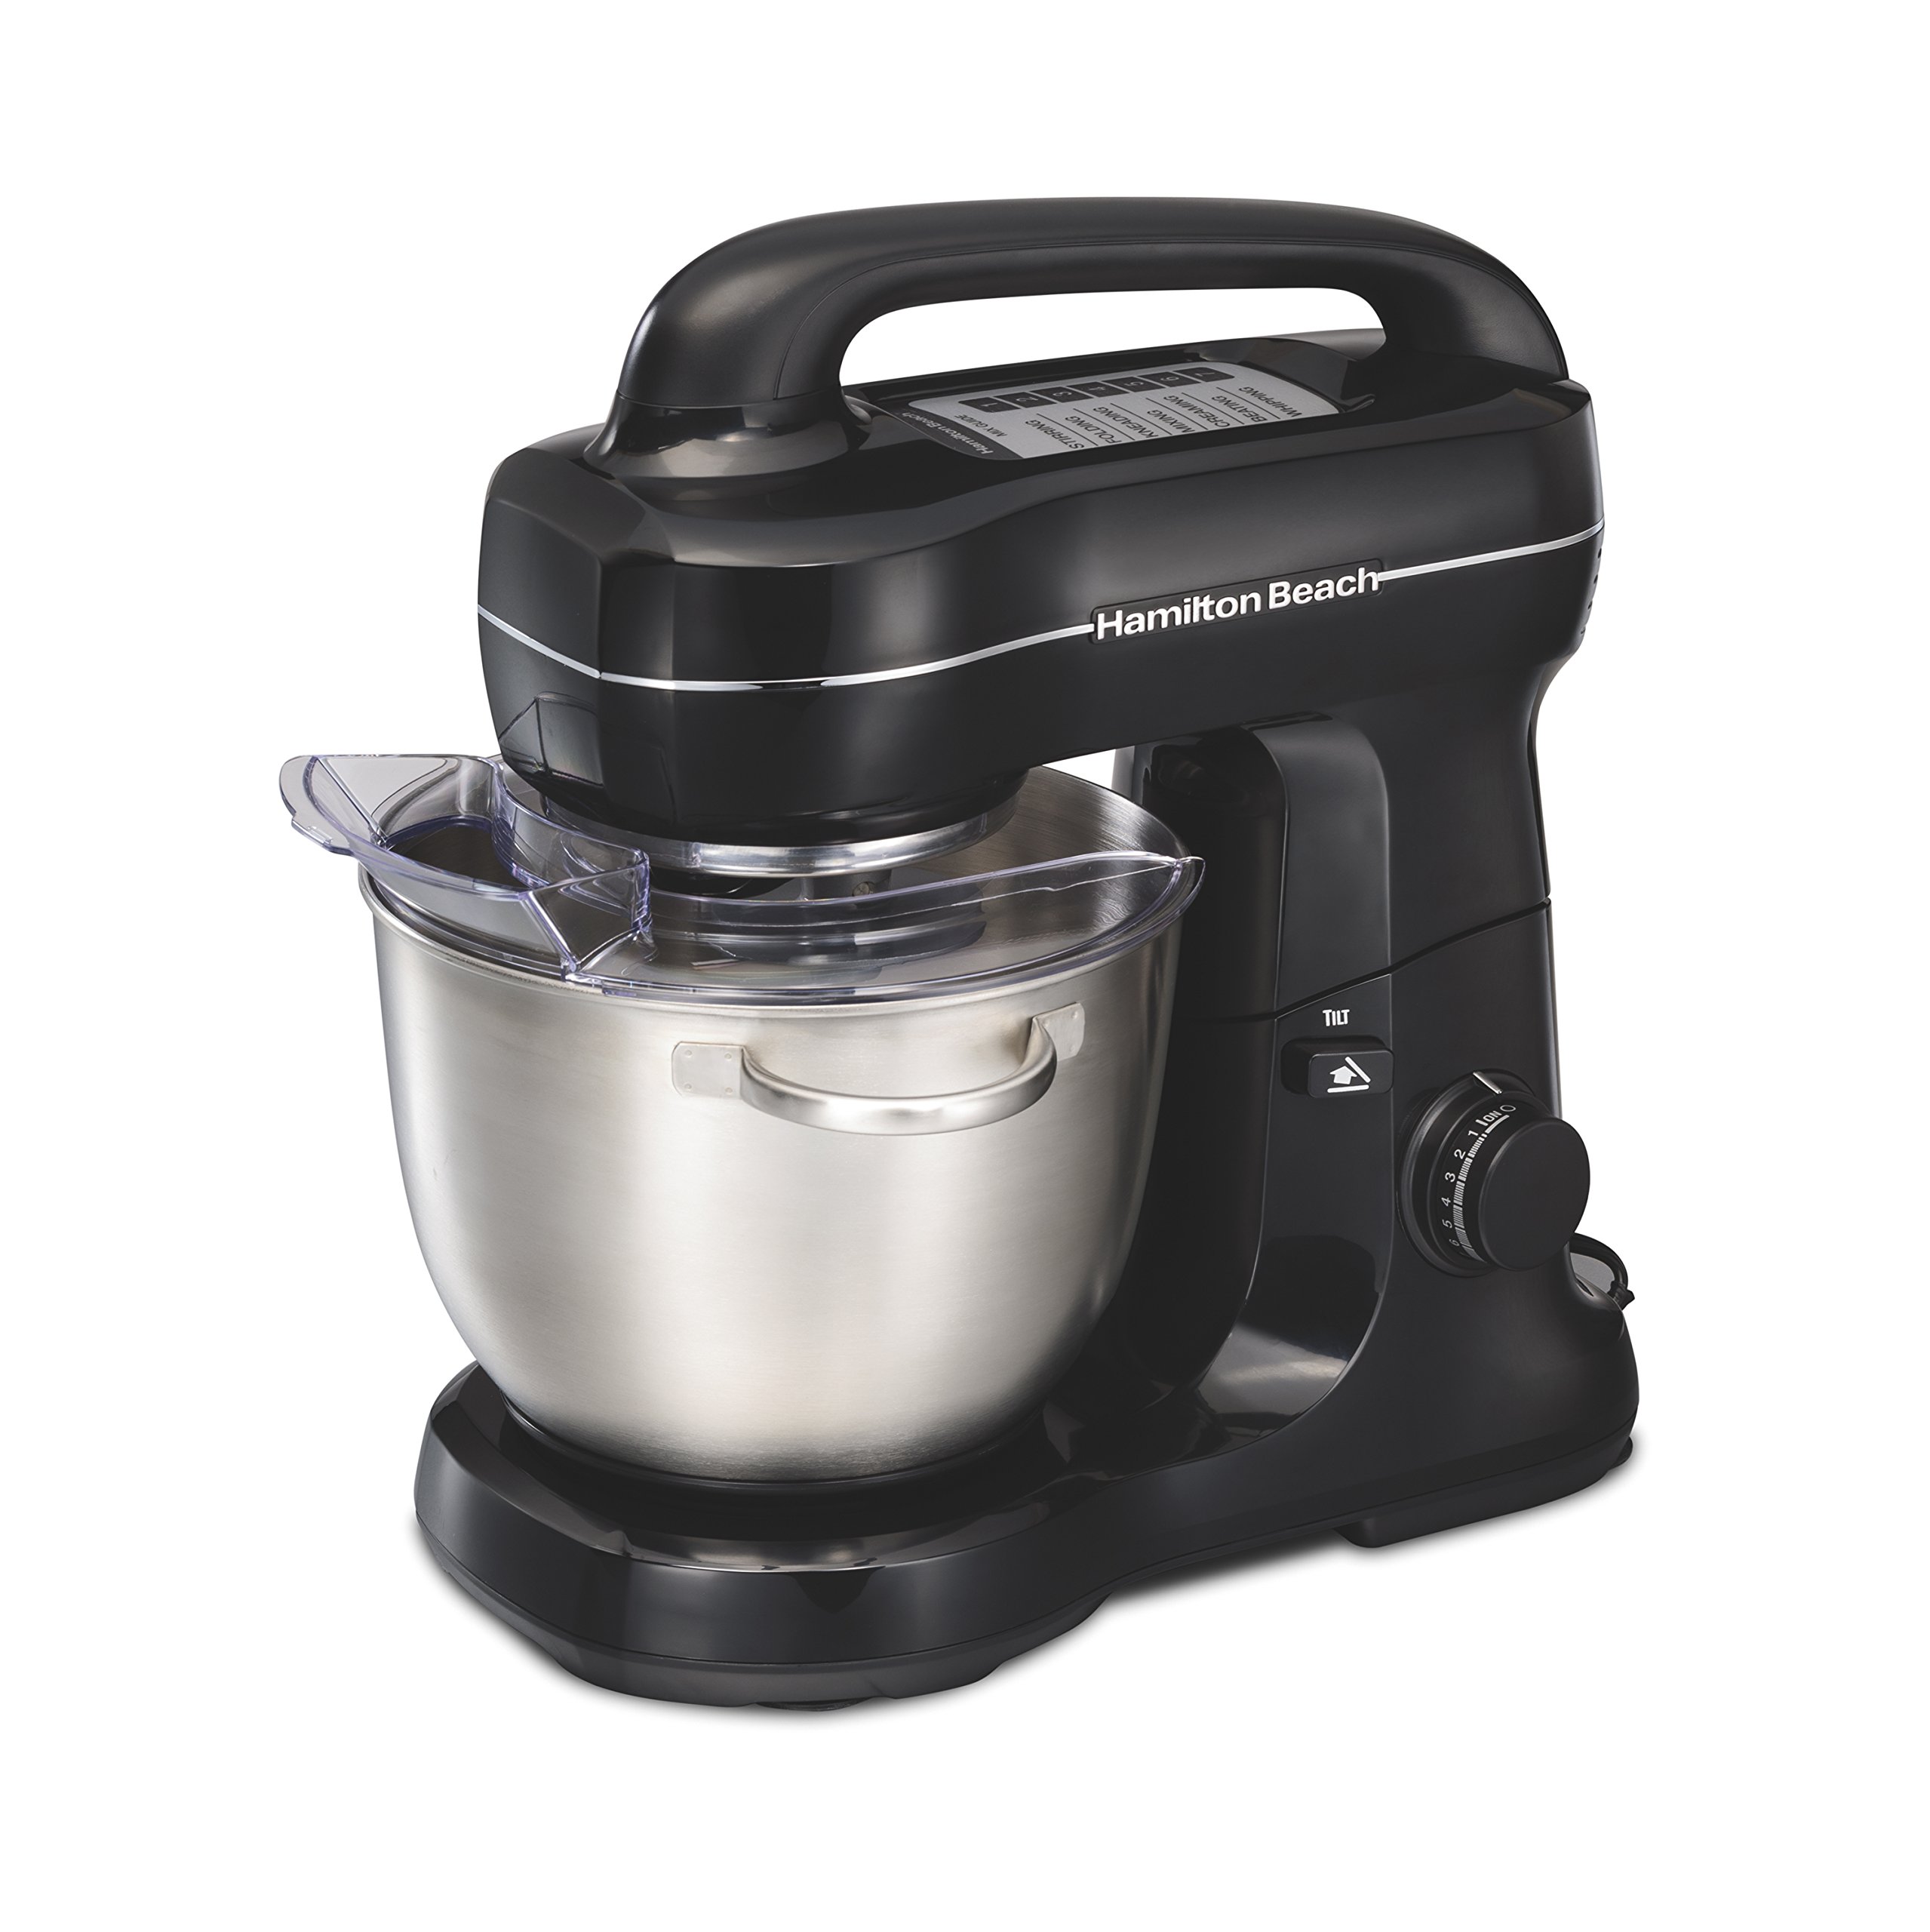 Hamilton Beach 63391 Stand Mixer, 7 Speeds with Whisk, Dough Hook, Flat Beater Attachments, 4 Quart, Black - image 1 of 7